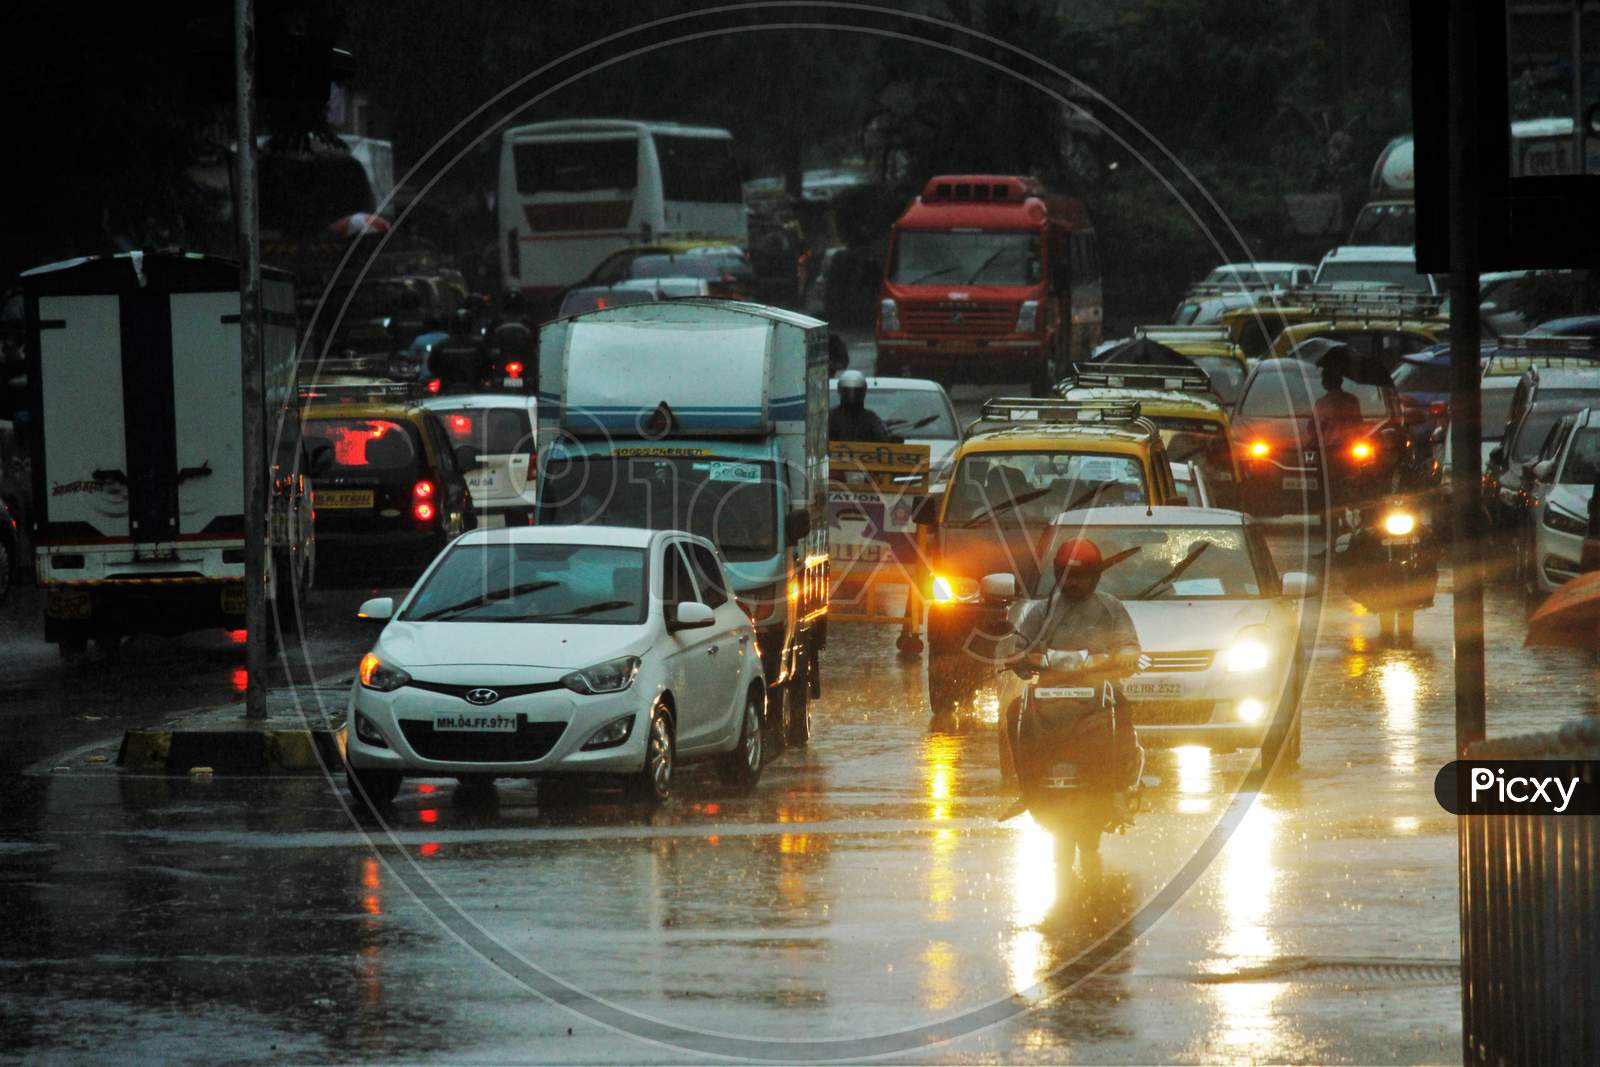 Traffic is seen on a road during heavy rains, in Mumbai on July 4, 2020.